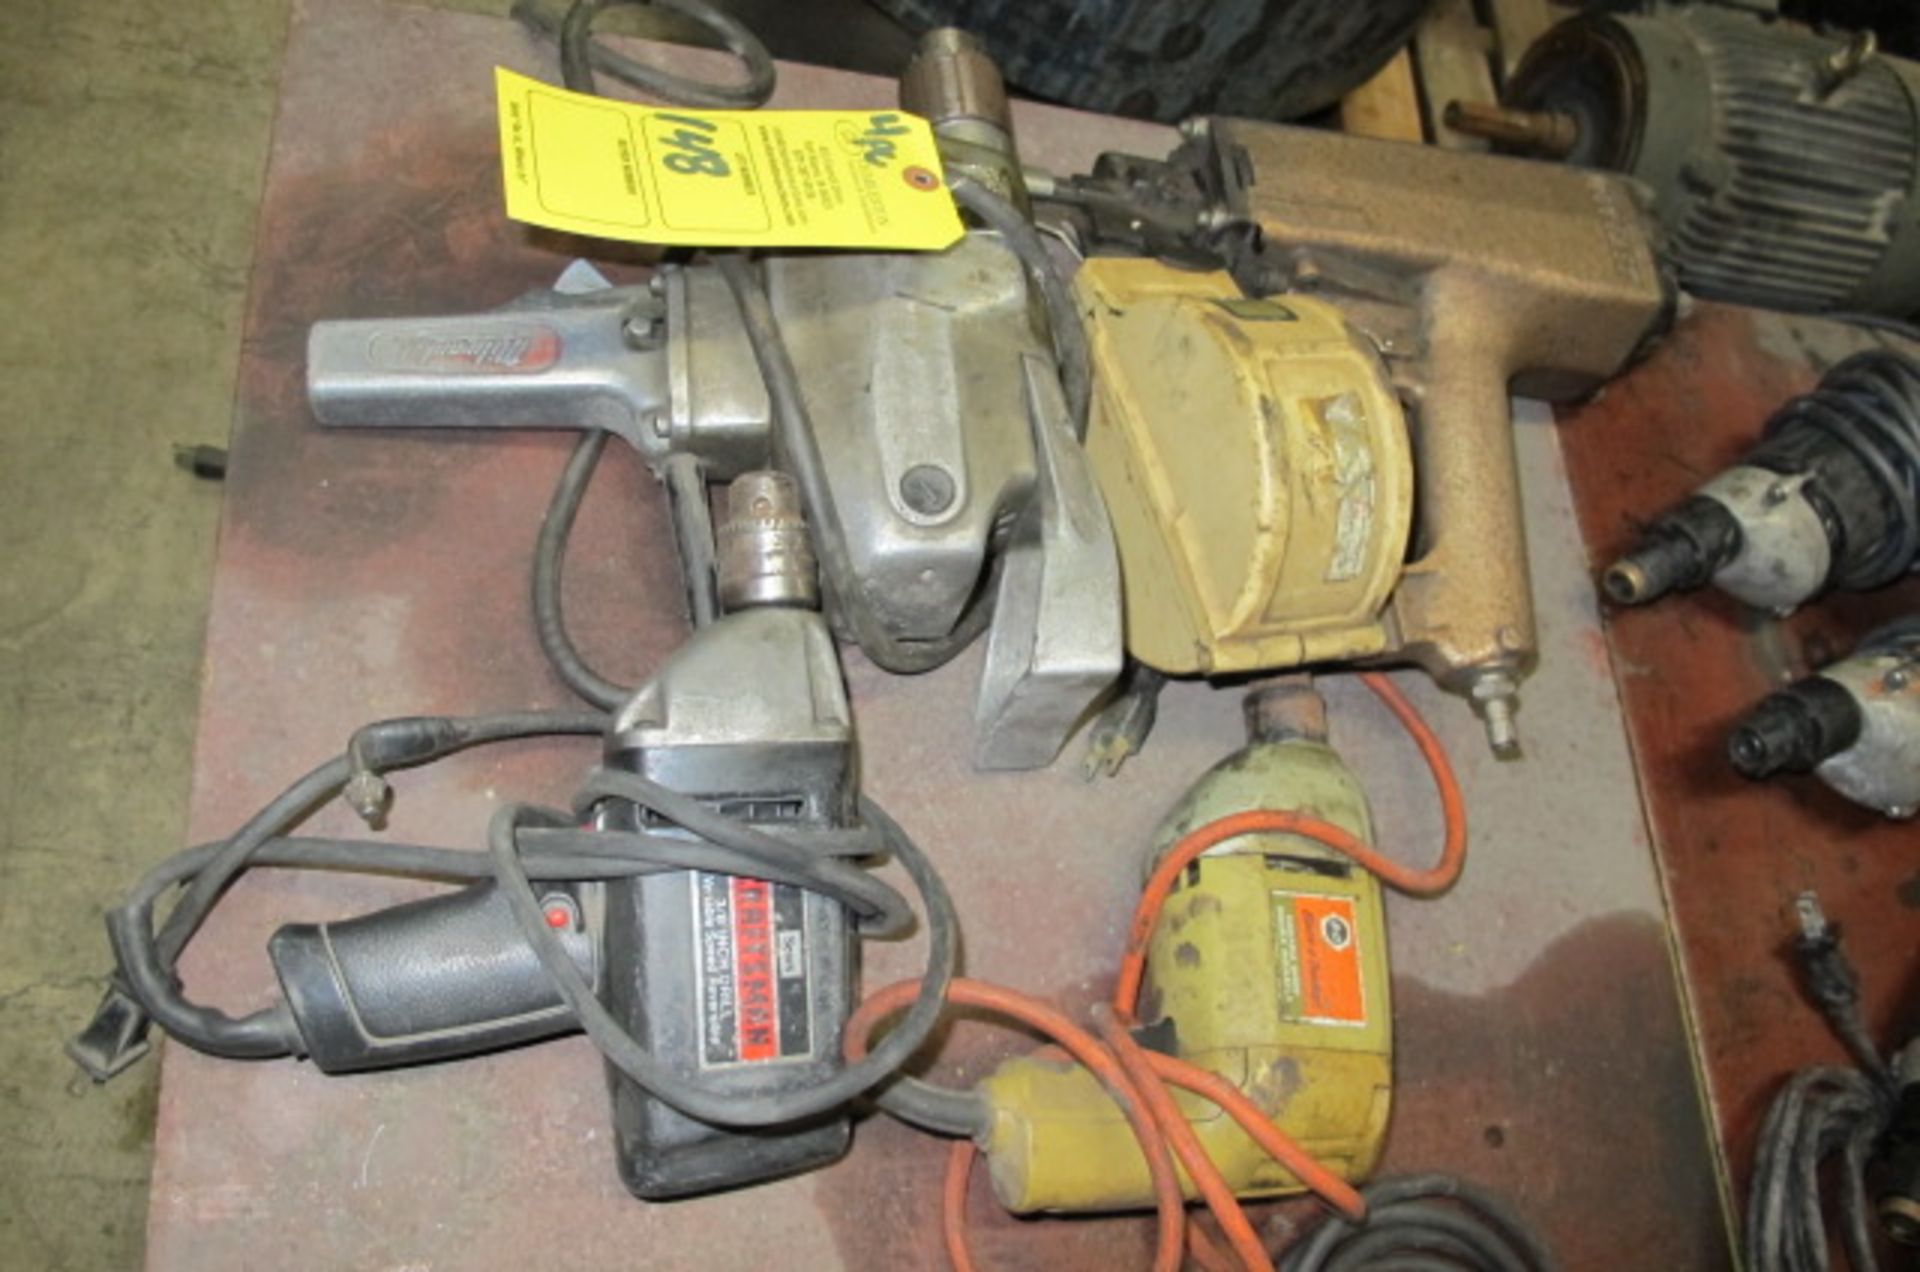 (3) ASSORTED DRILLS; DUO FAST COIL NAILER 7493 OH 120, Lyons, Ohio 43523 - all Gaylord plastic